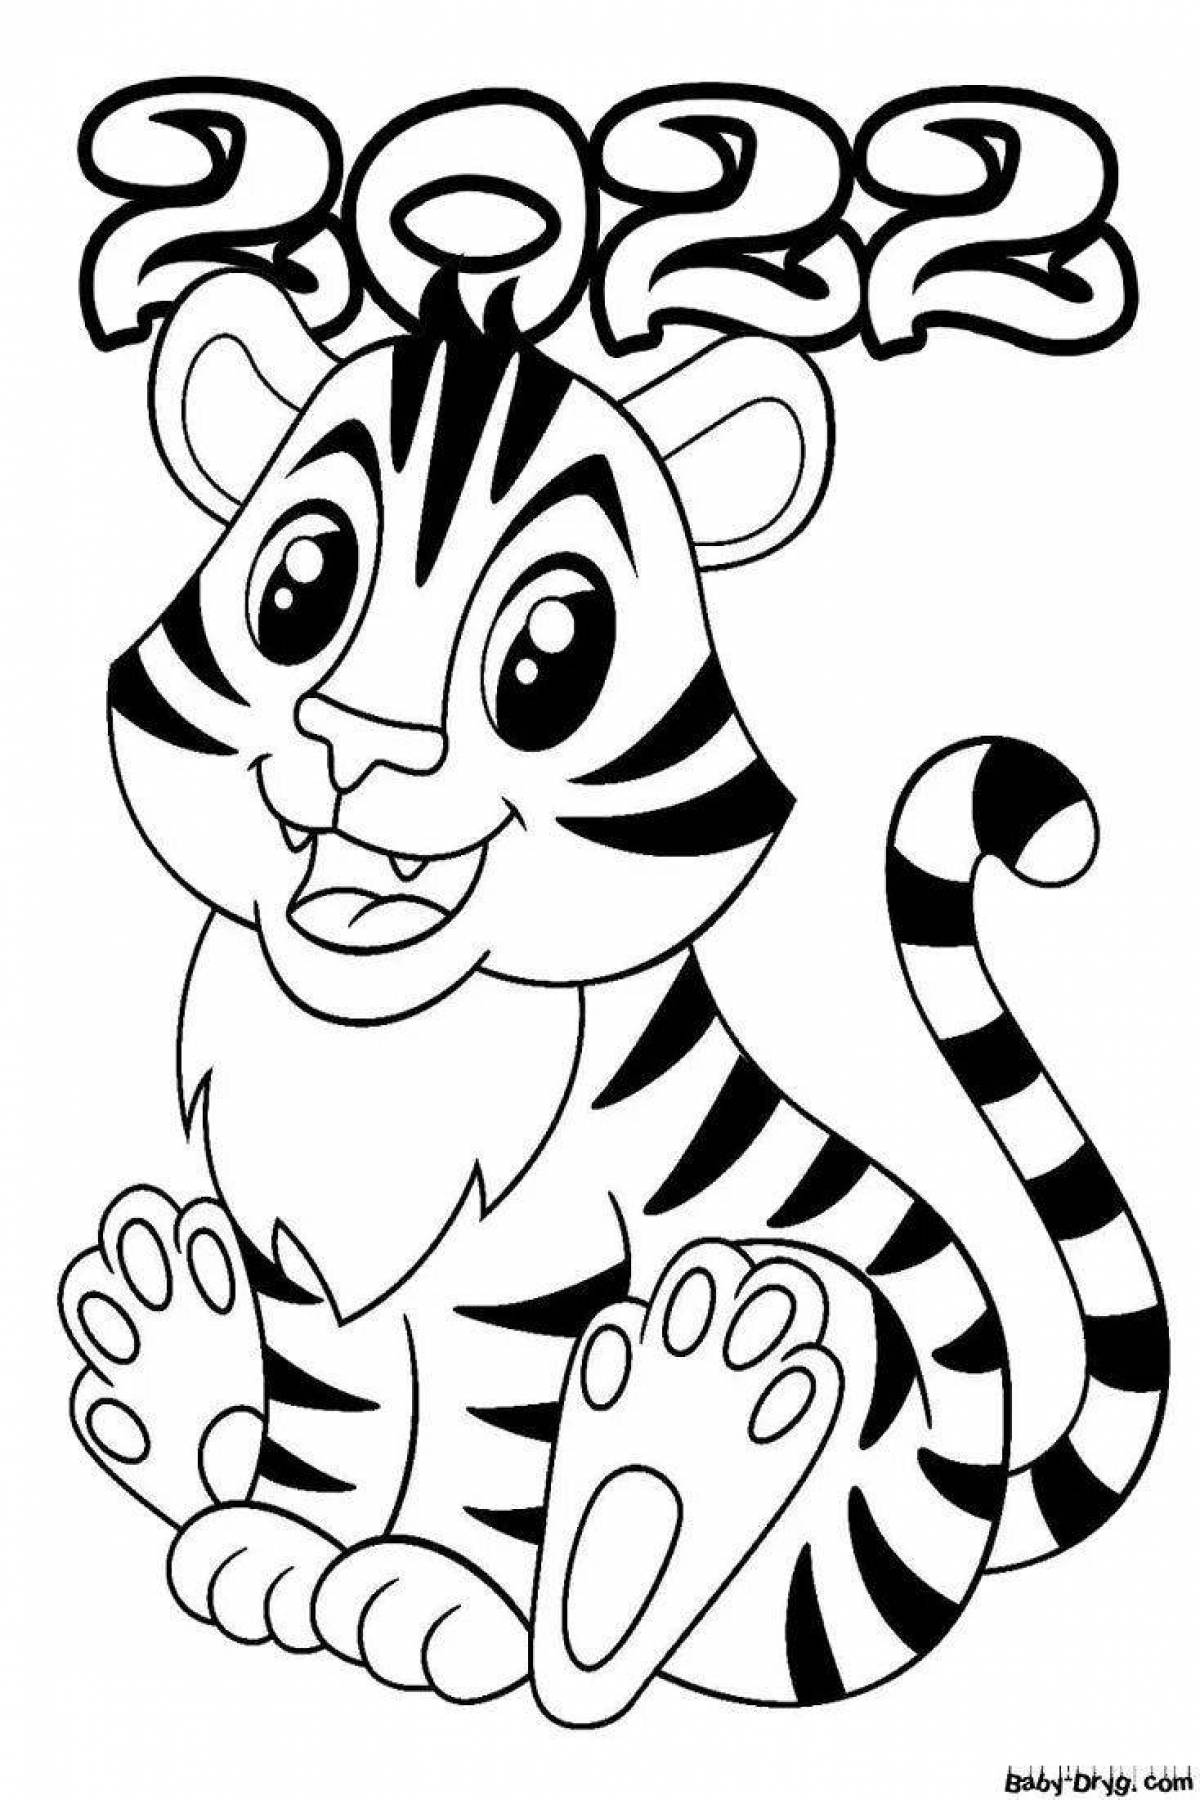 Tiger inspirational coloring book for 3-4 year olds